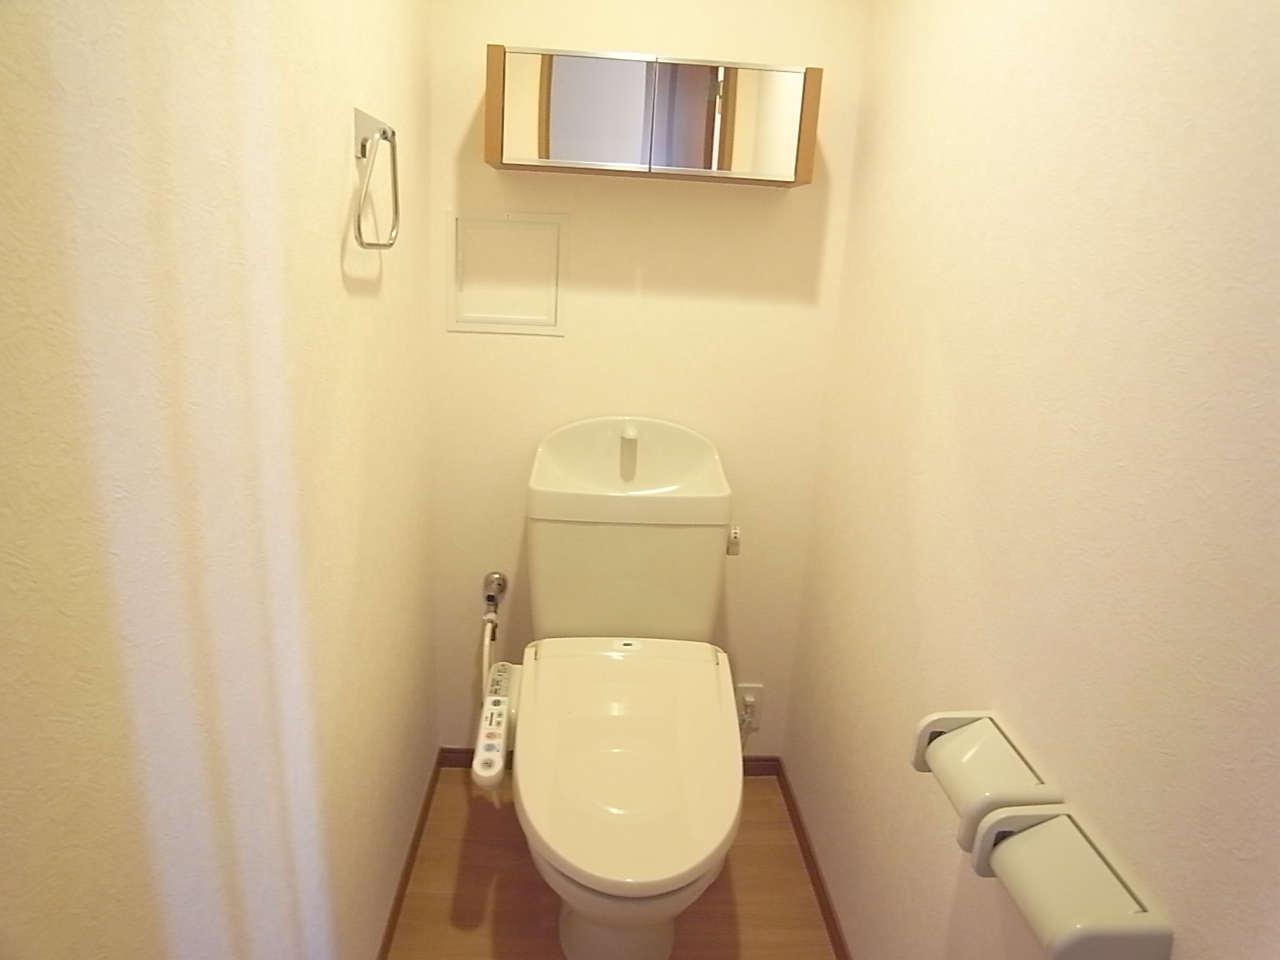 Toilet. Toilet also widely, ^^ Glad to come with up to shelf